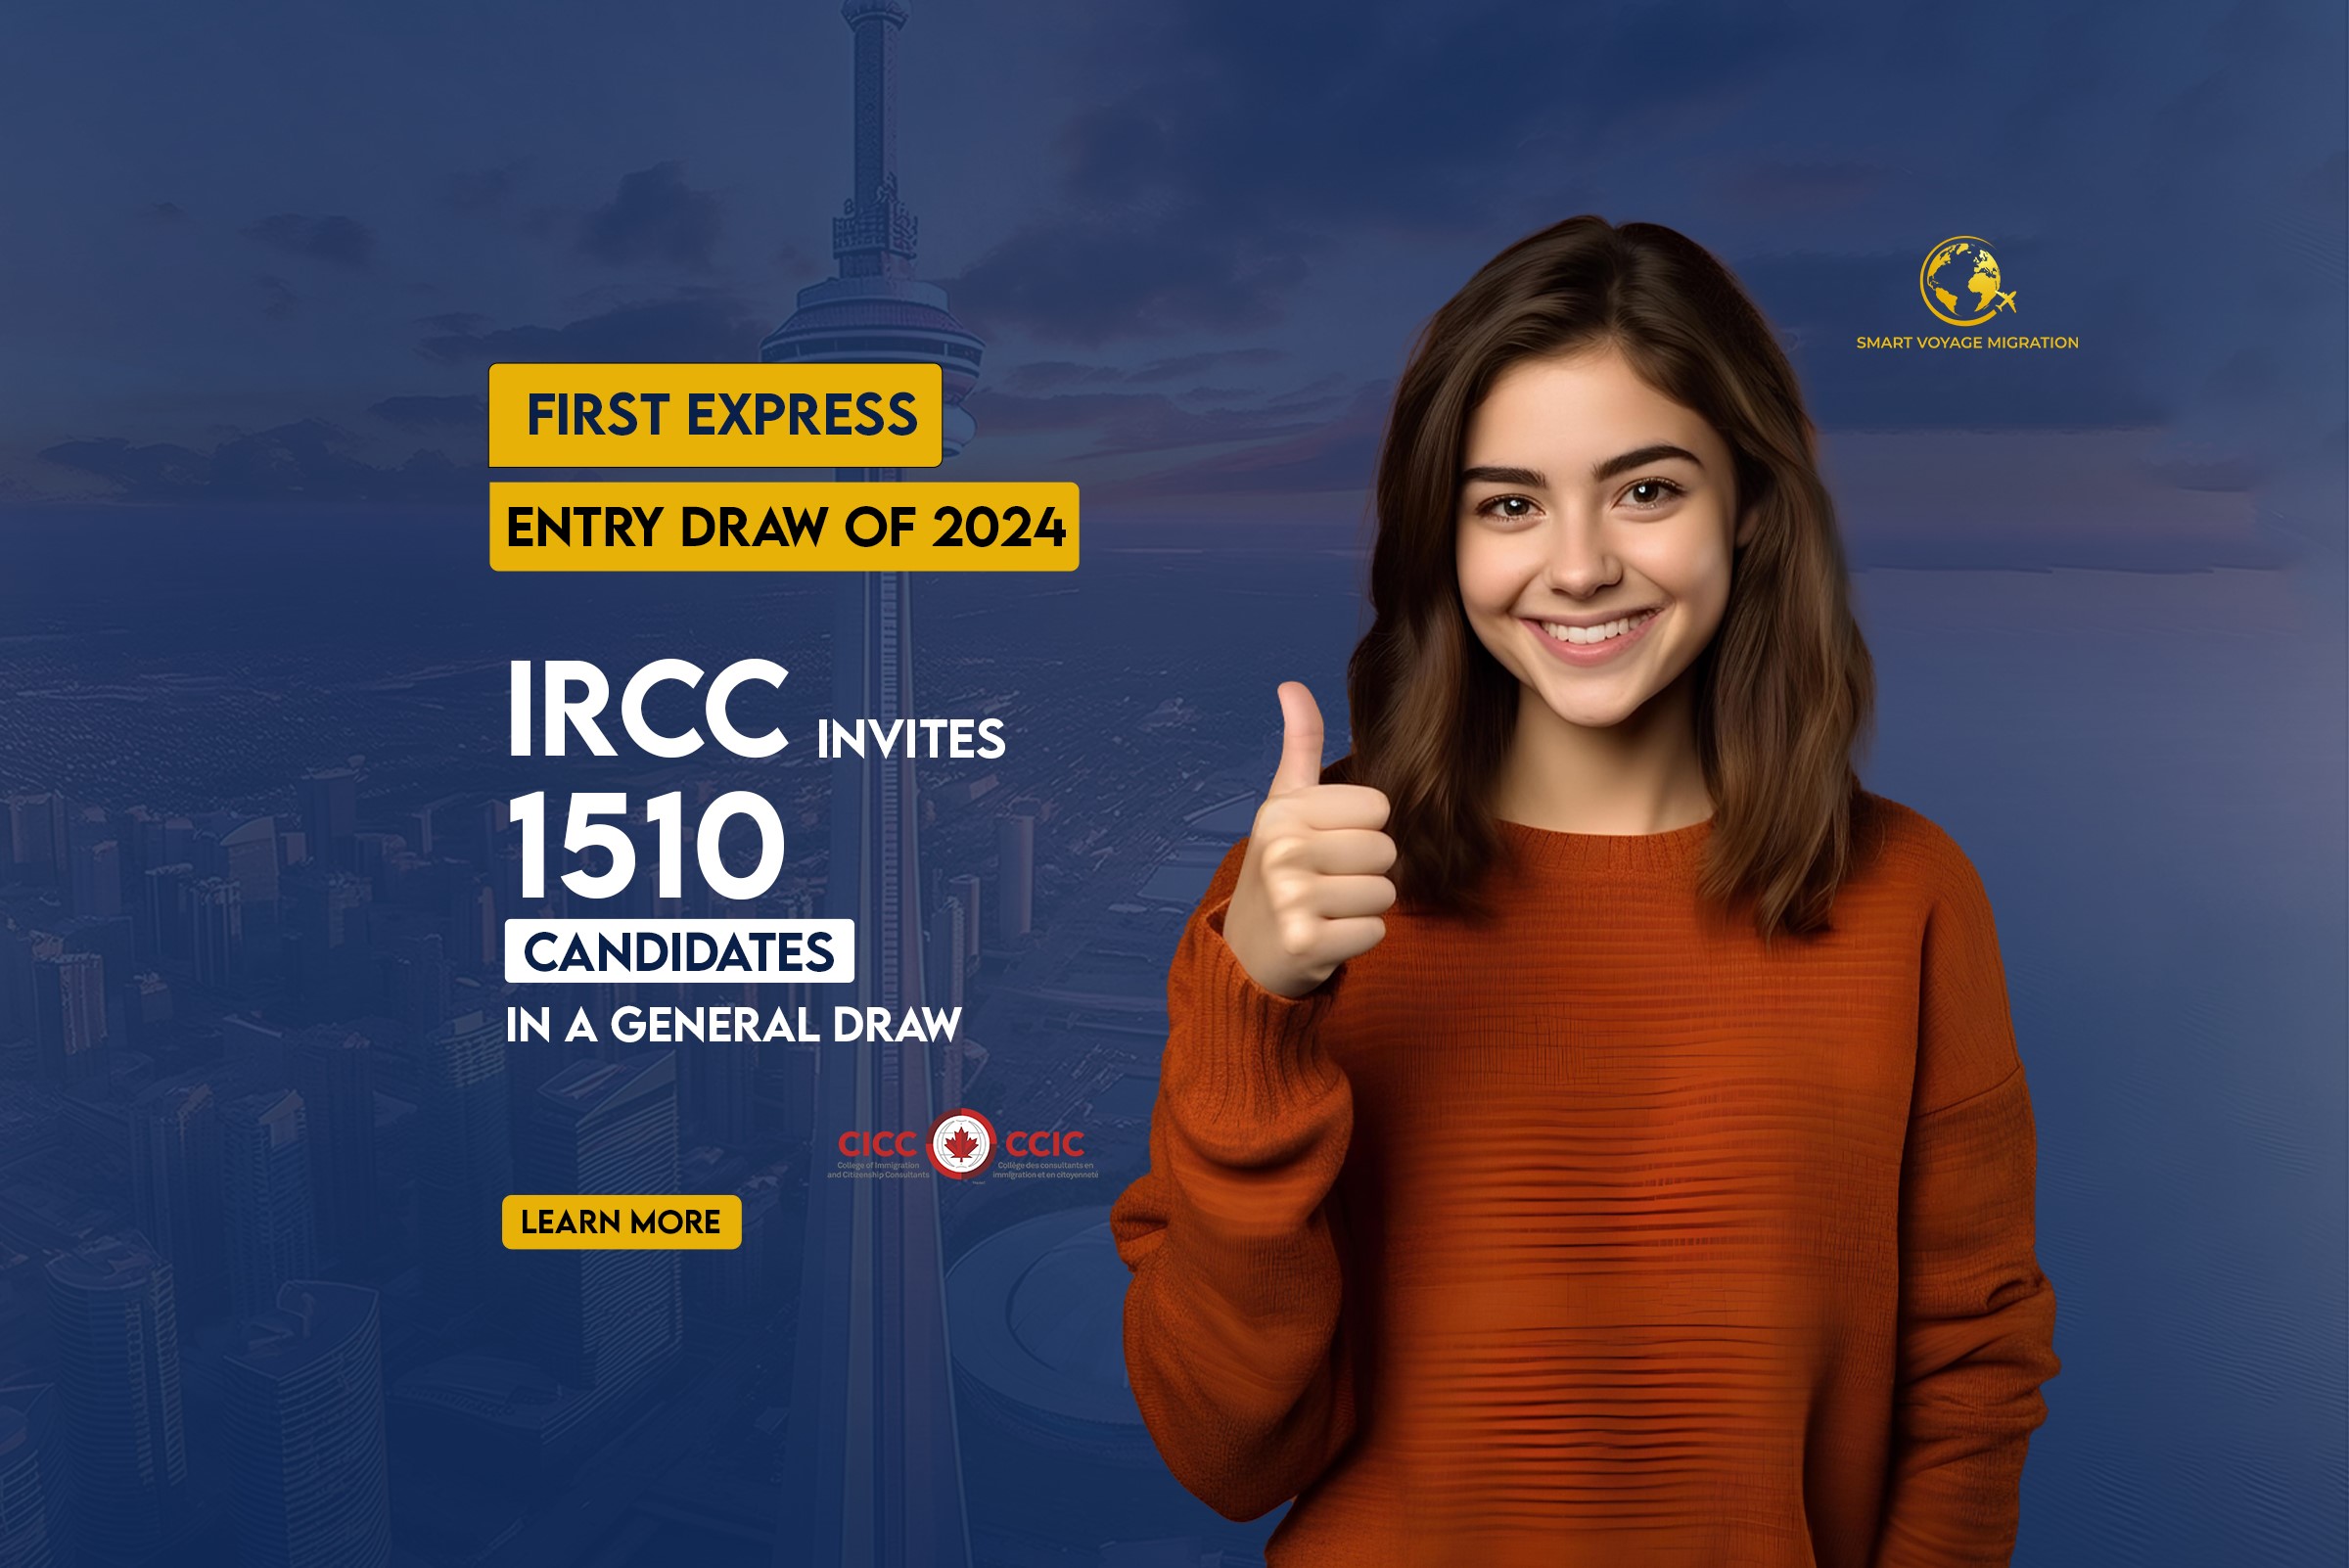 First Express Entry draw of 2024: A total of 1510 candidates invited in a general draw